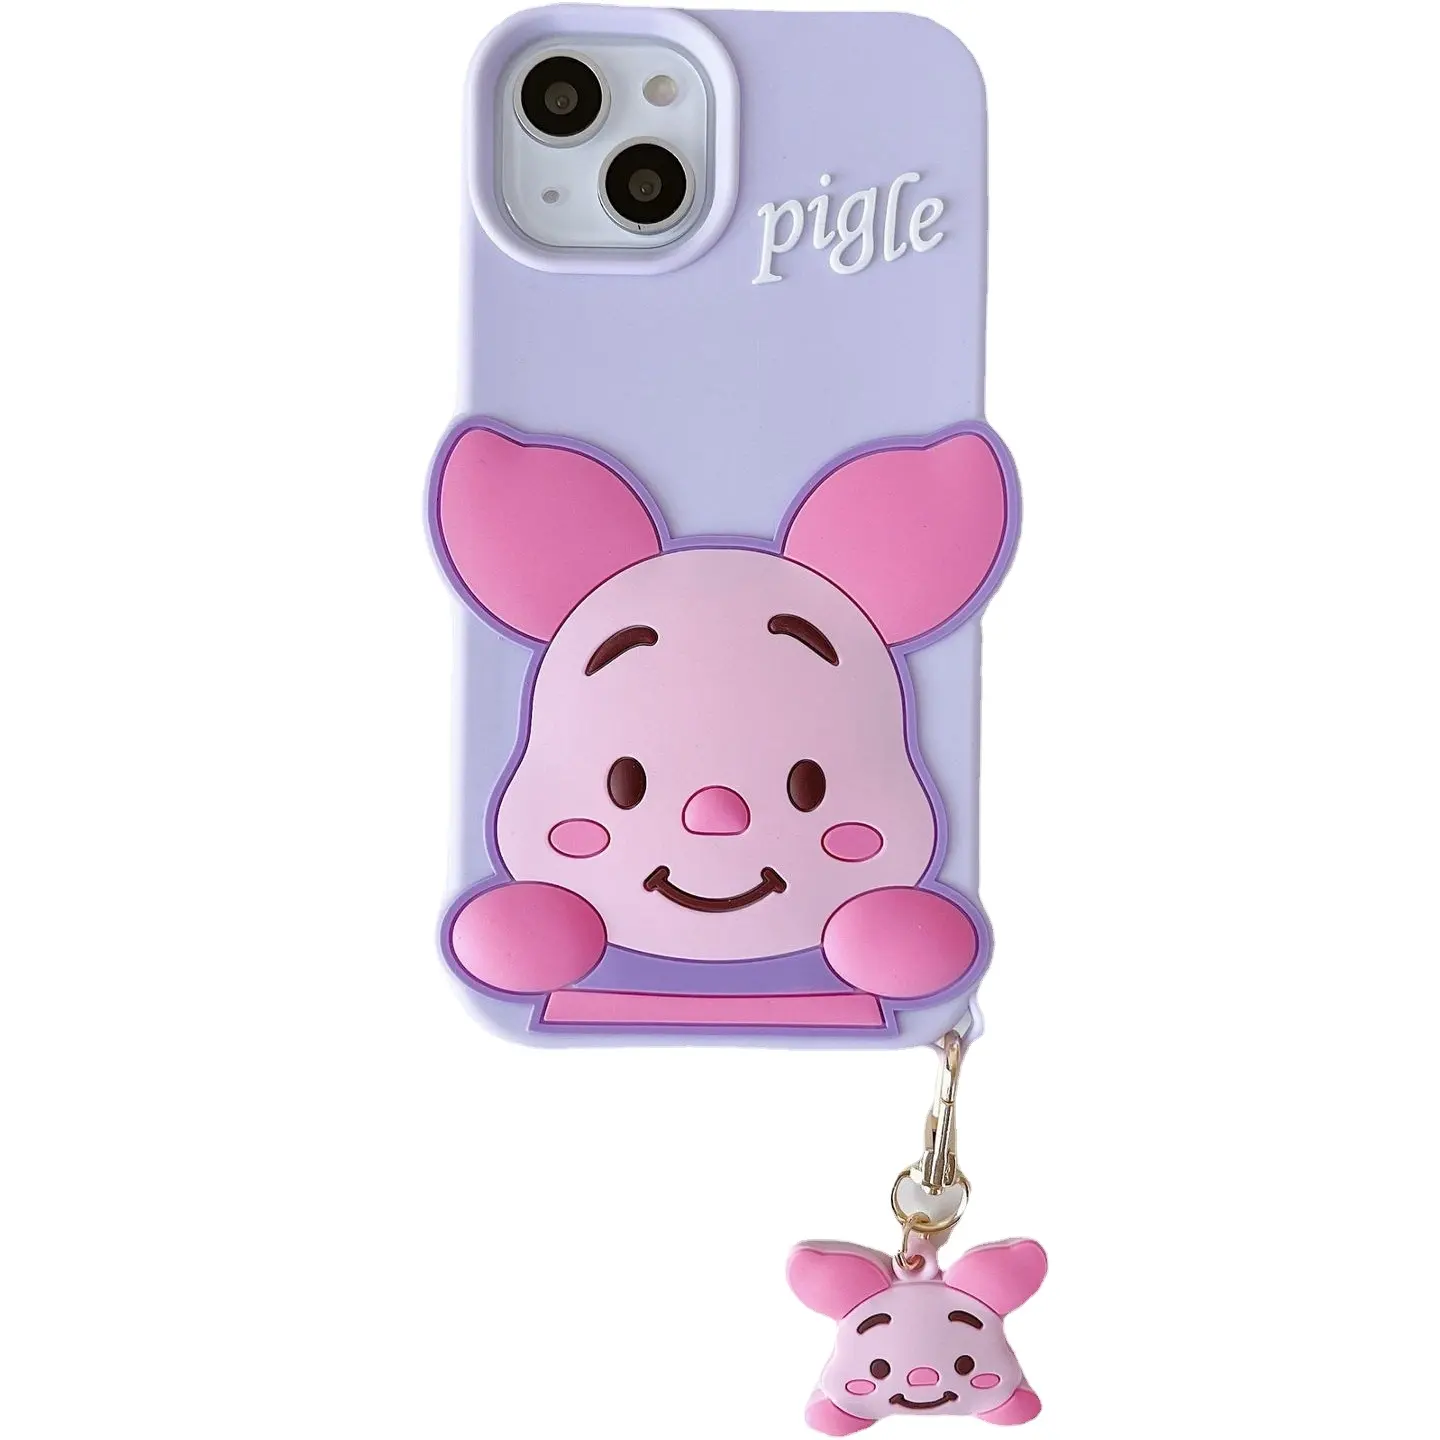 2022 new pink purple pig factory price cartoon silicone phone case for iphone 13 pro max